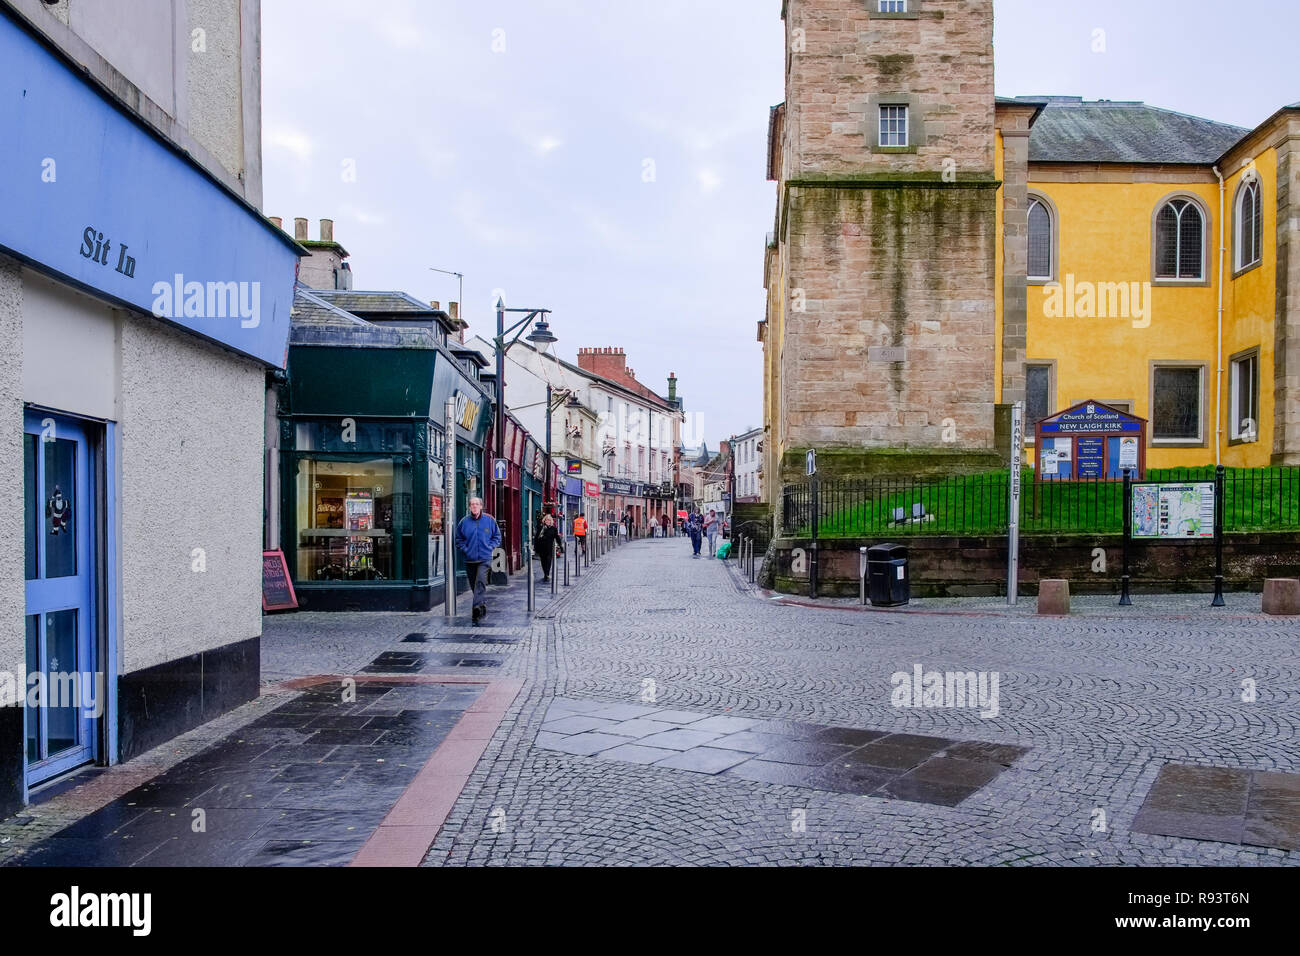 Kilmarnock, Scotland, UK - December 10, 2018: Bank Street pedestrian area in the Scottish town centre of Kilmarnock with empty shops being an area of  Stock Photo